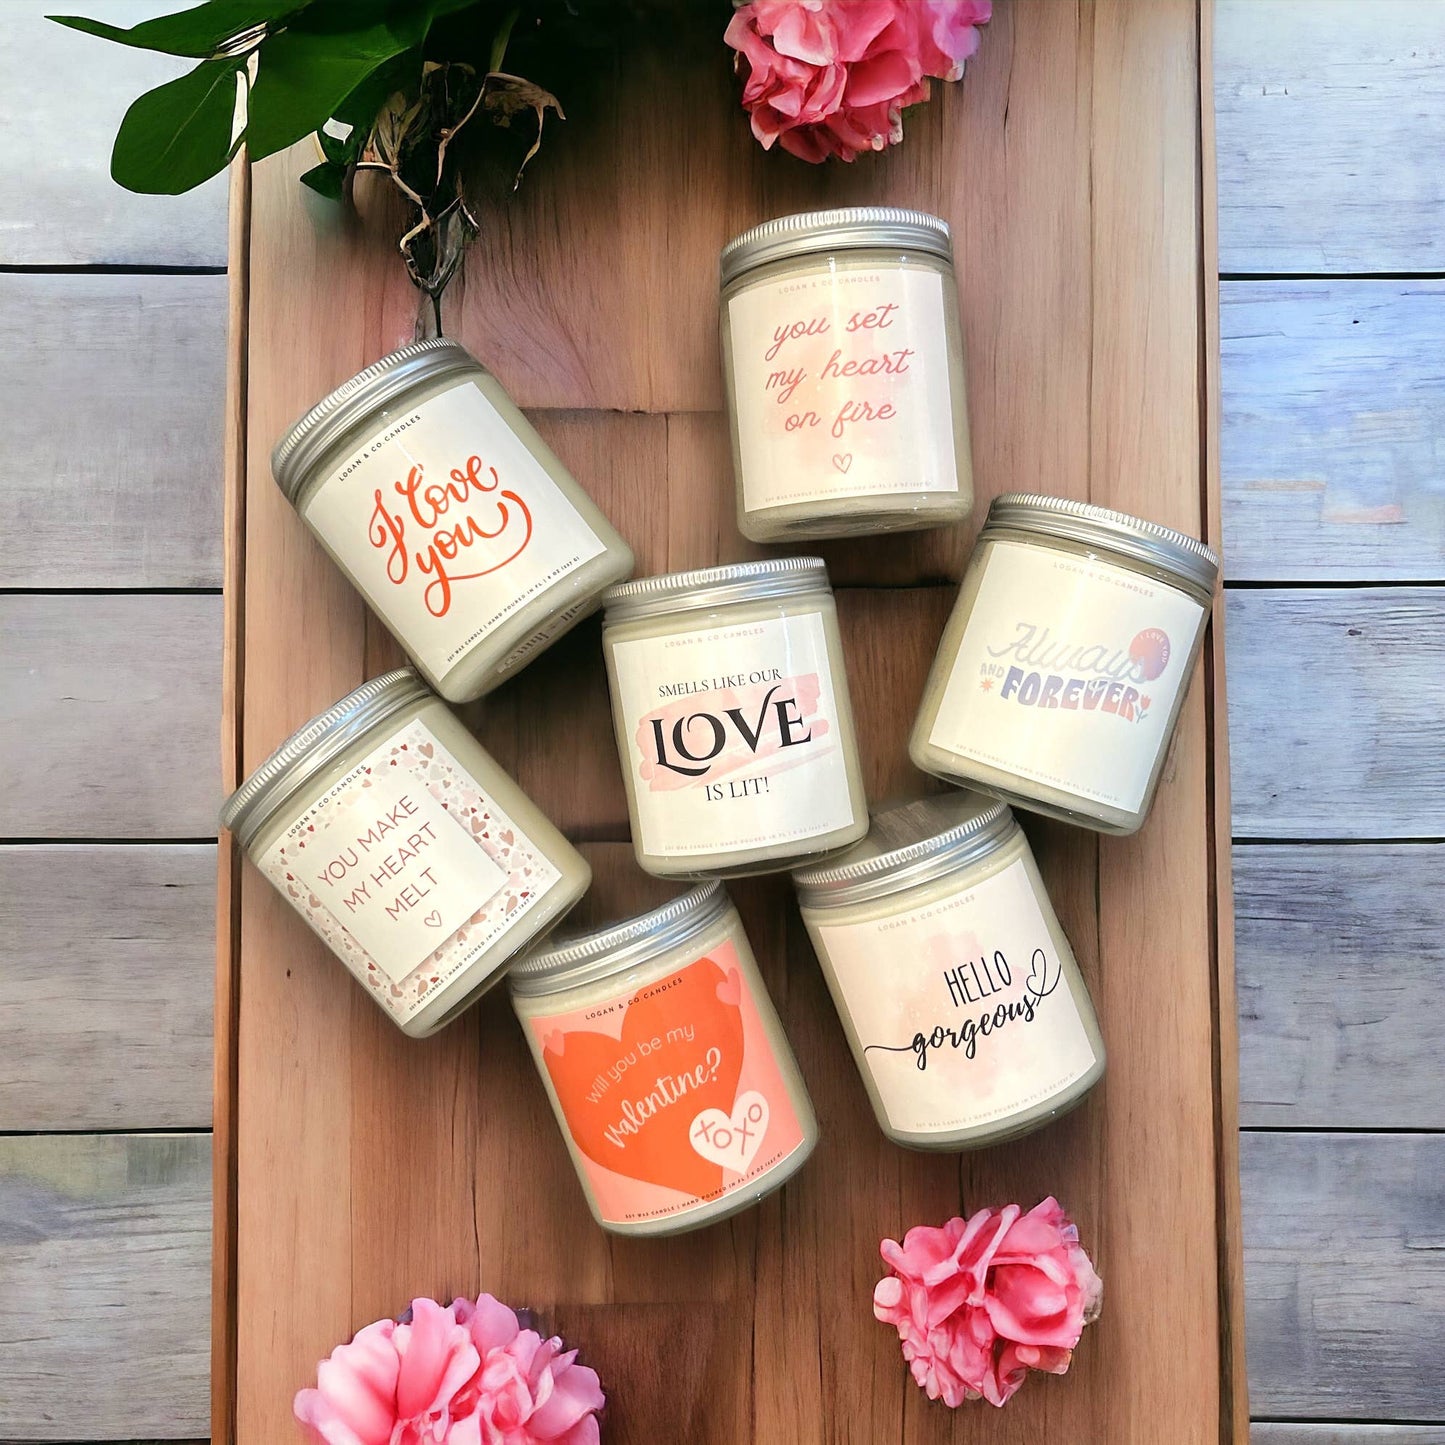 I Love You soy Candle, Gift for Her